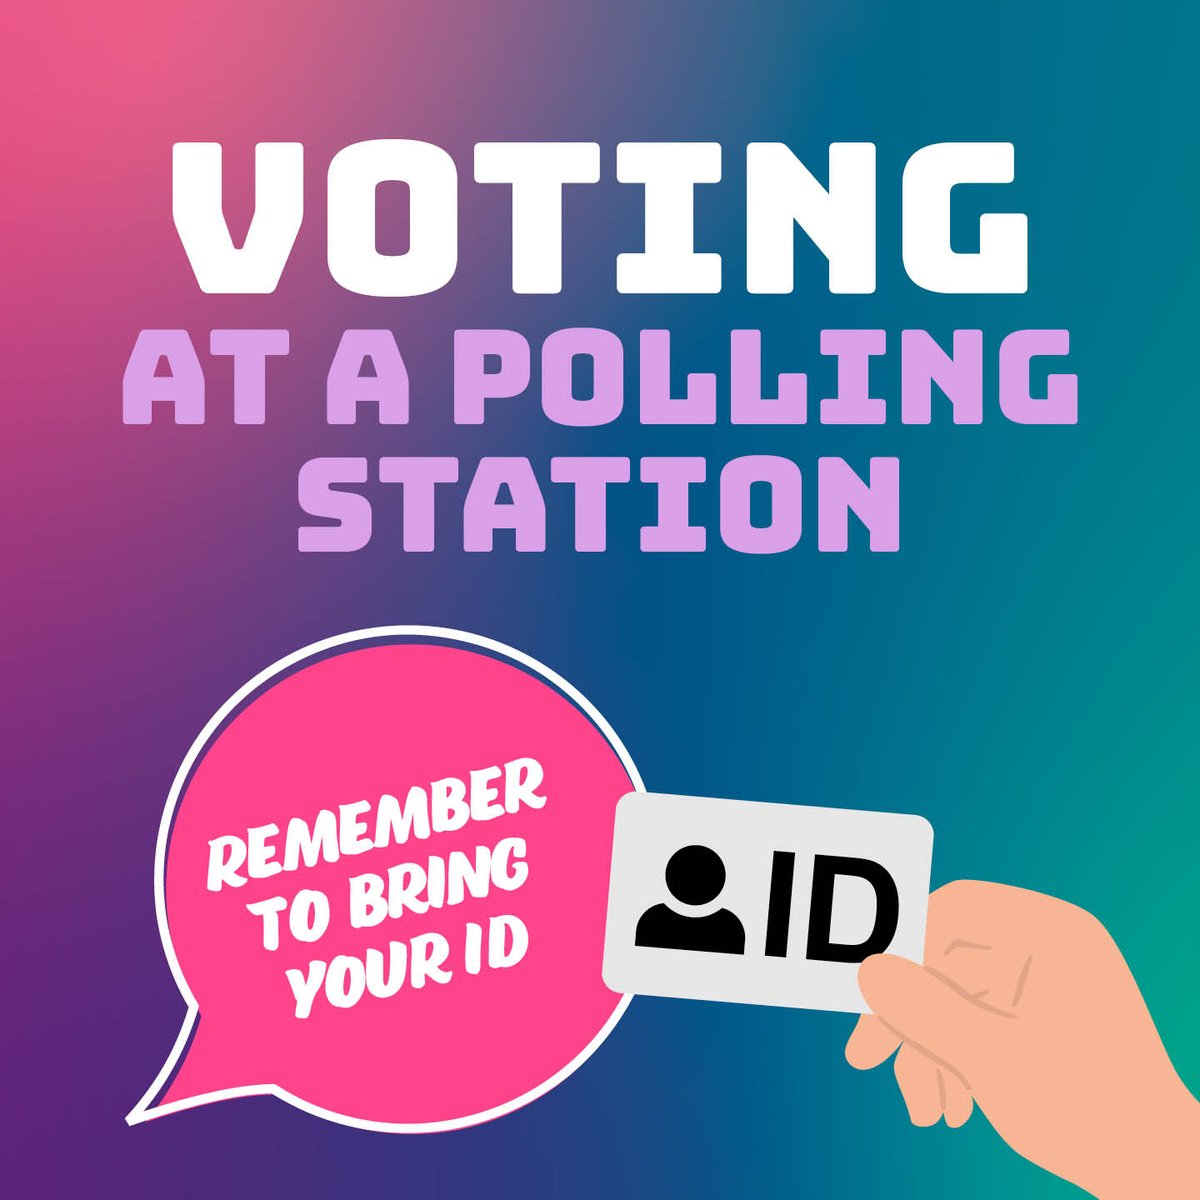 If you are voting in person on 2 May, you must bring along a form of photo ID. Find out what ID is accepted at gov.uk/how-to-vote/ph…. If you don’t have photo ID, you can apply for a Voter Authority Certificate by 5pm on Wednesday 24 April at ow.ly/UVVX50R3g9F